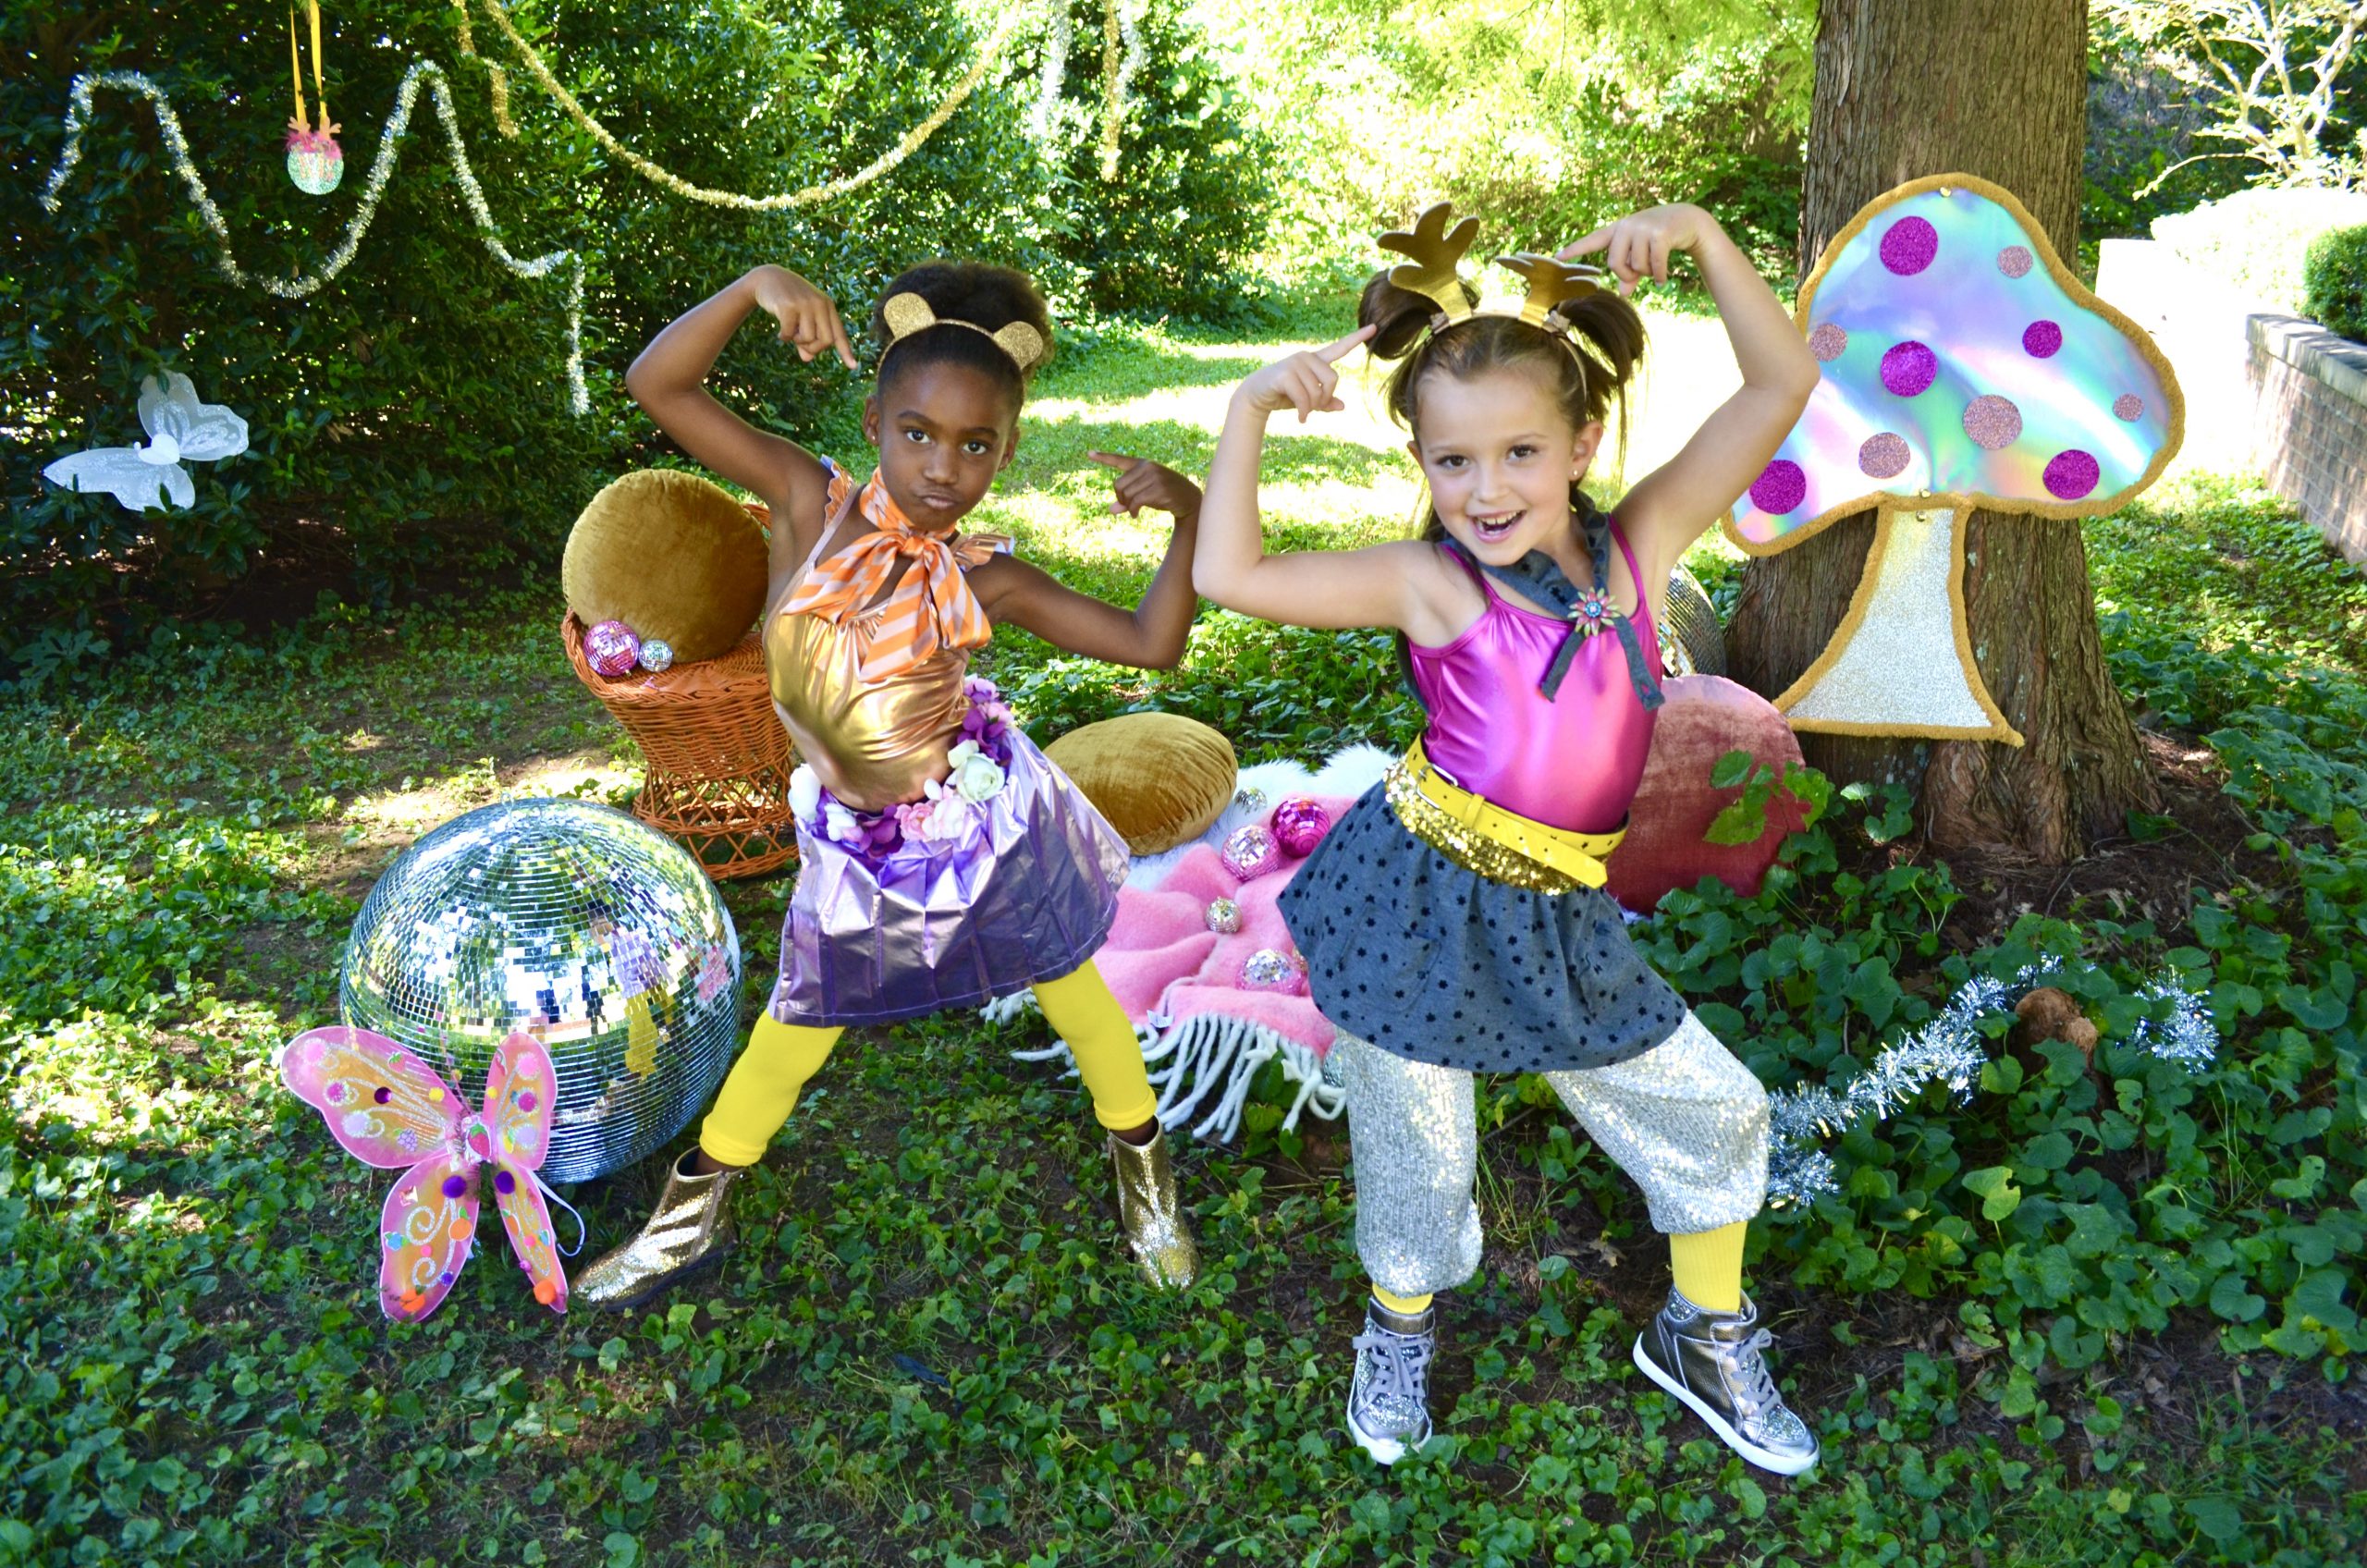 Two young dancers posing in a woodlands scene with disco balls and a sparkly mushroom, getting ready for a fun dance activity!